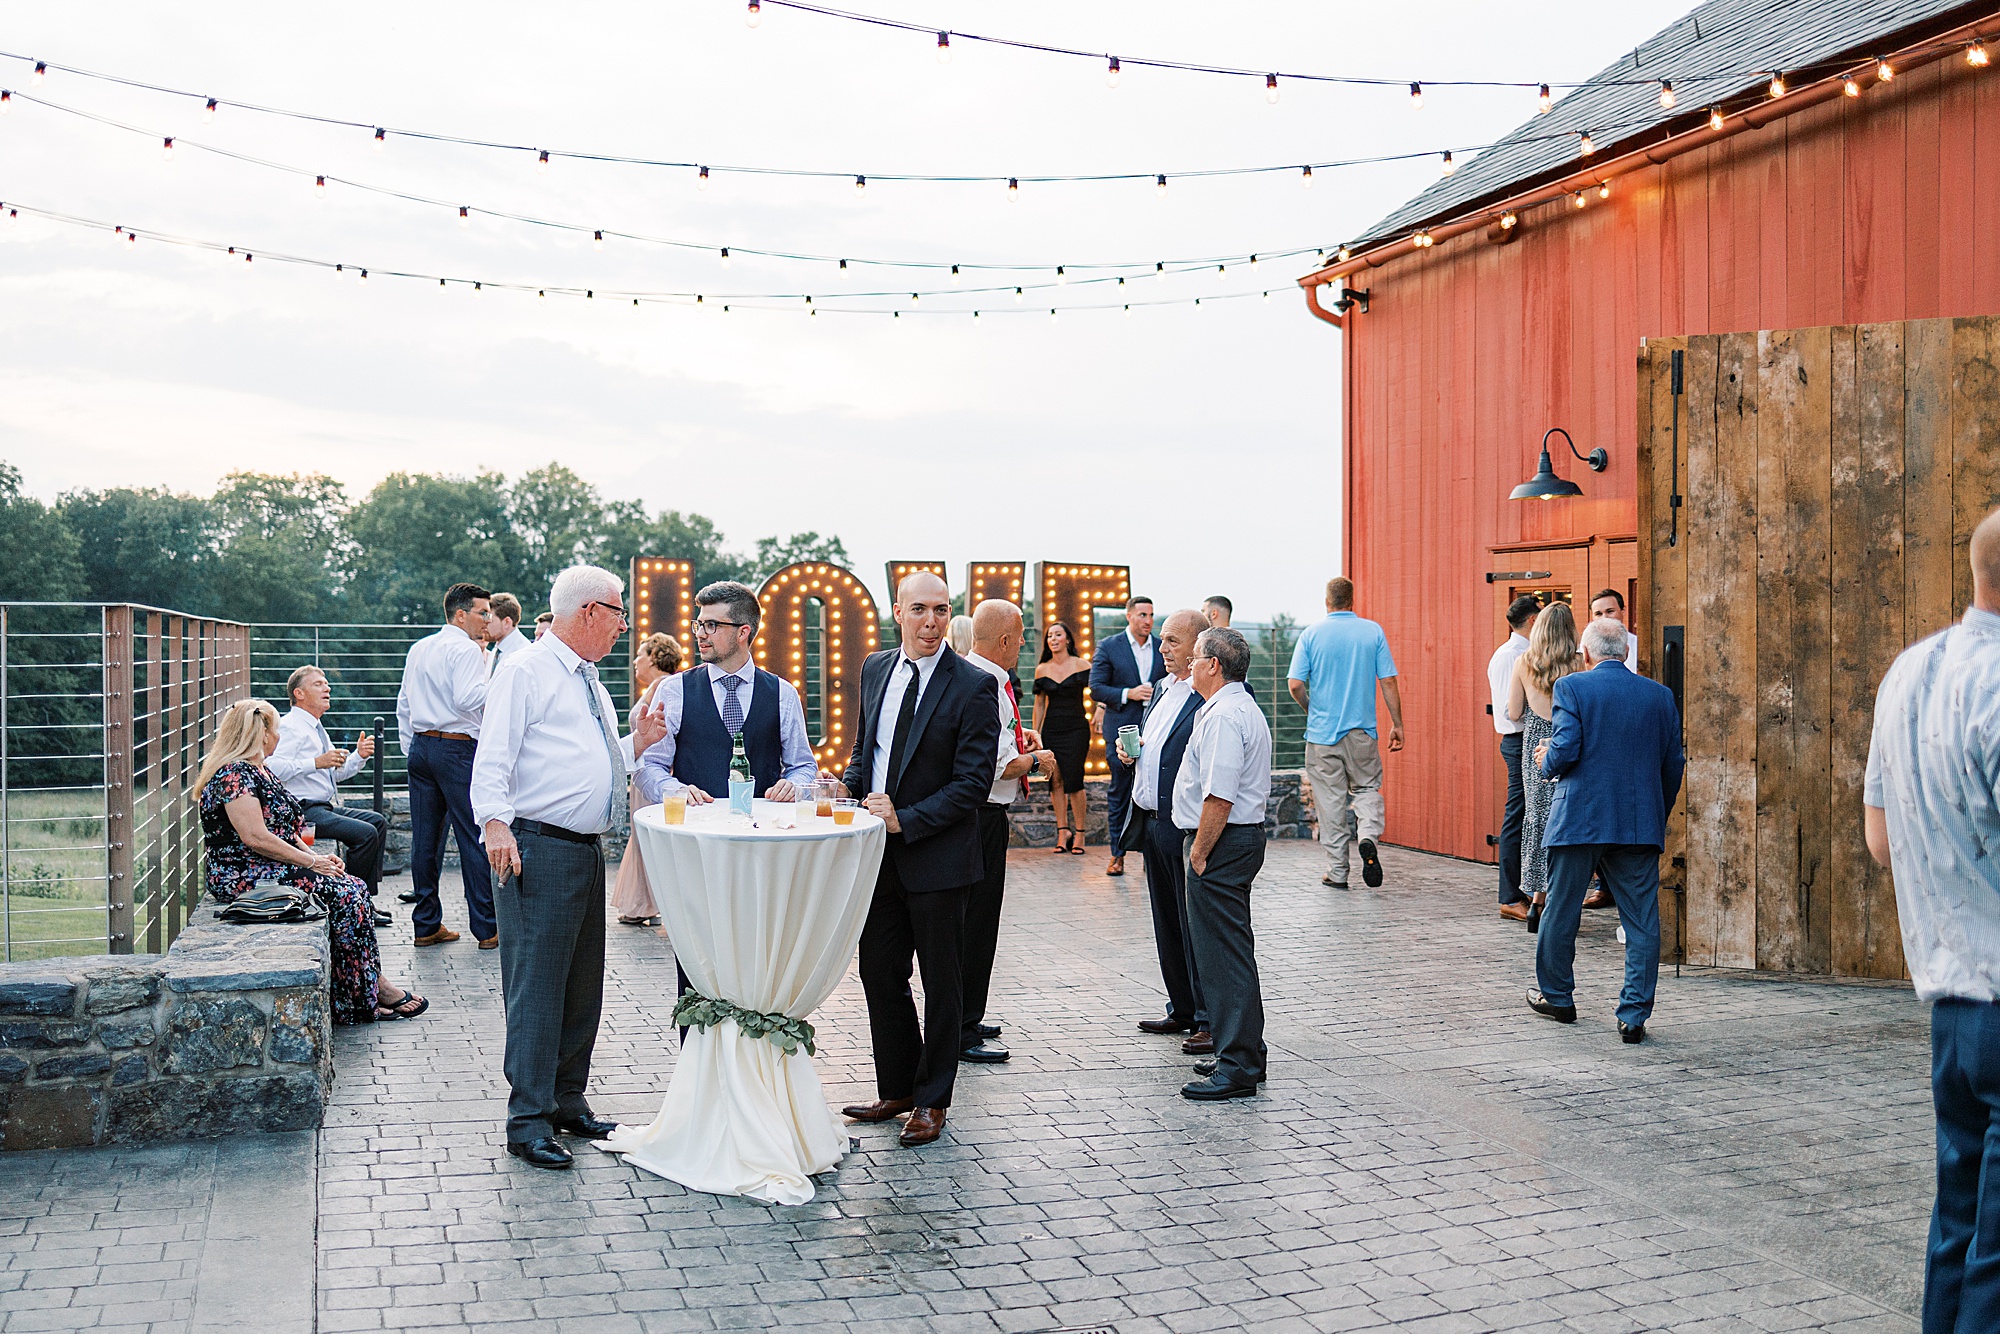 guests mingle outside on patio at The Farm at Eagles Ridge